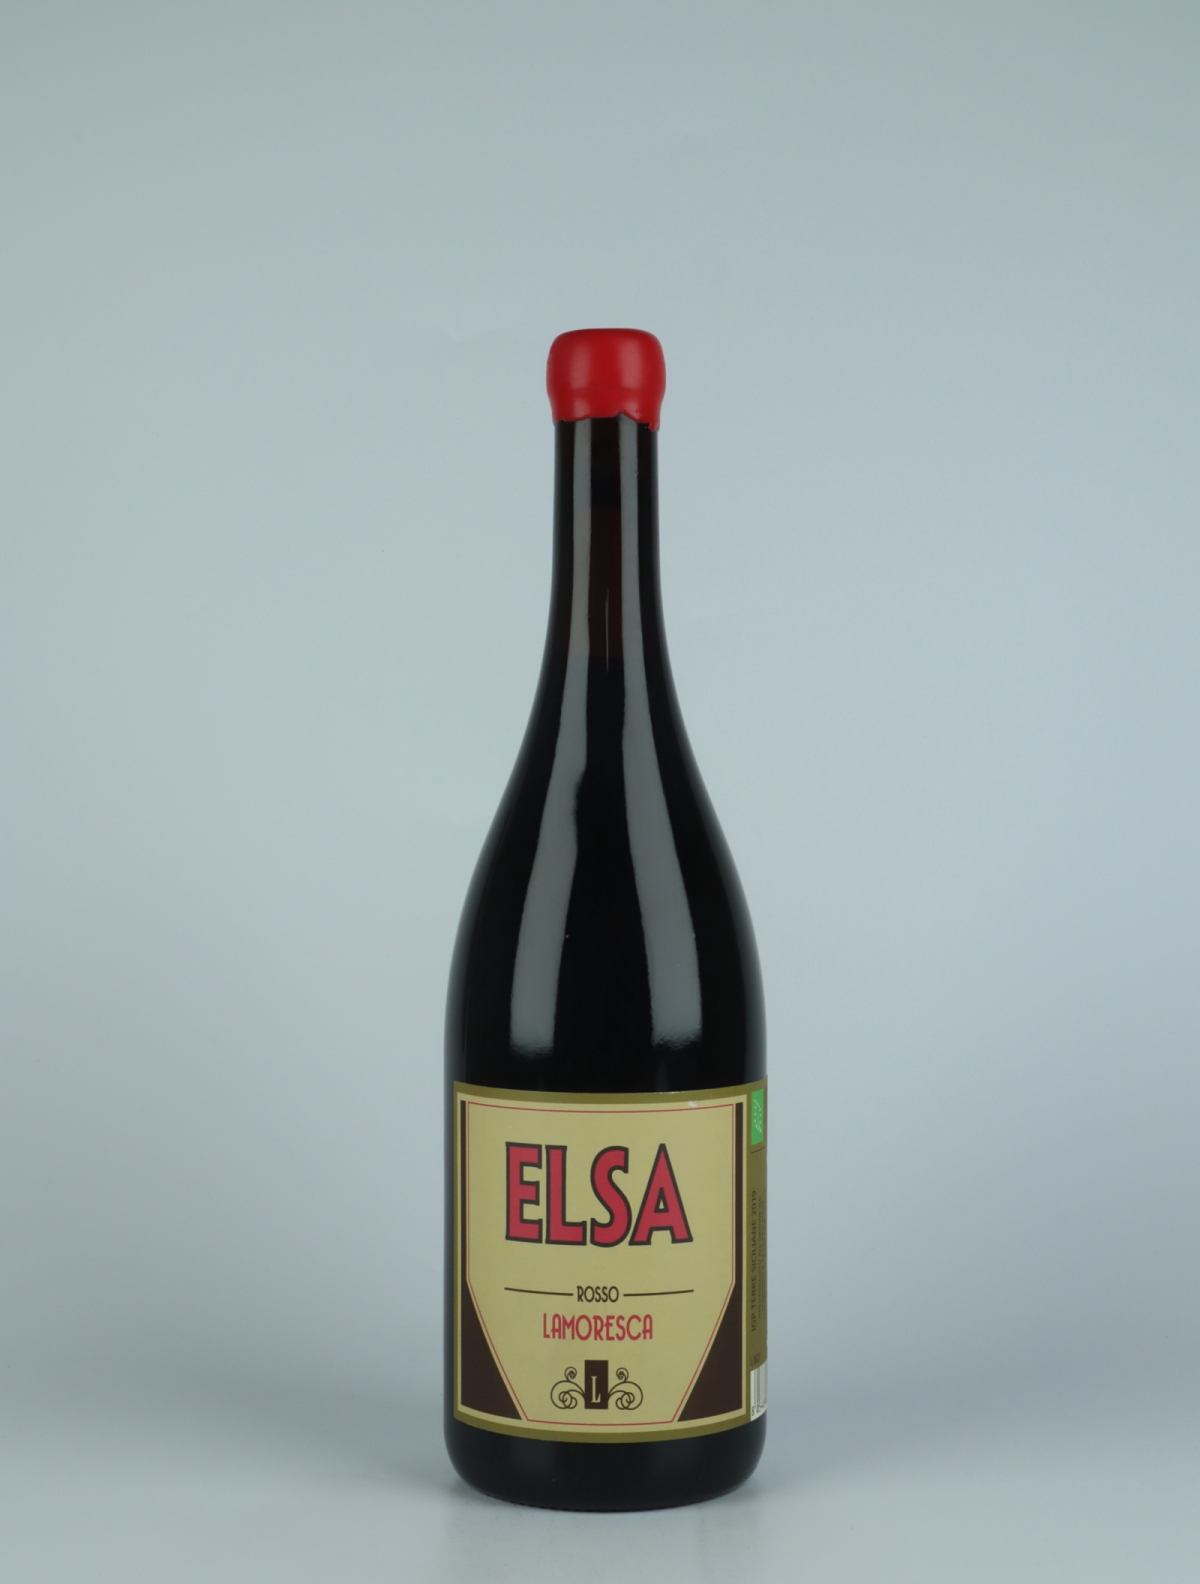 A bottle 2019 Elsa Red wine from Lamoresca, Sicily in Italy